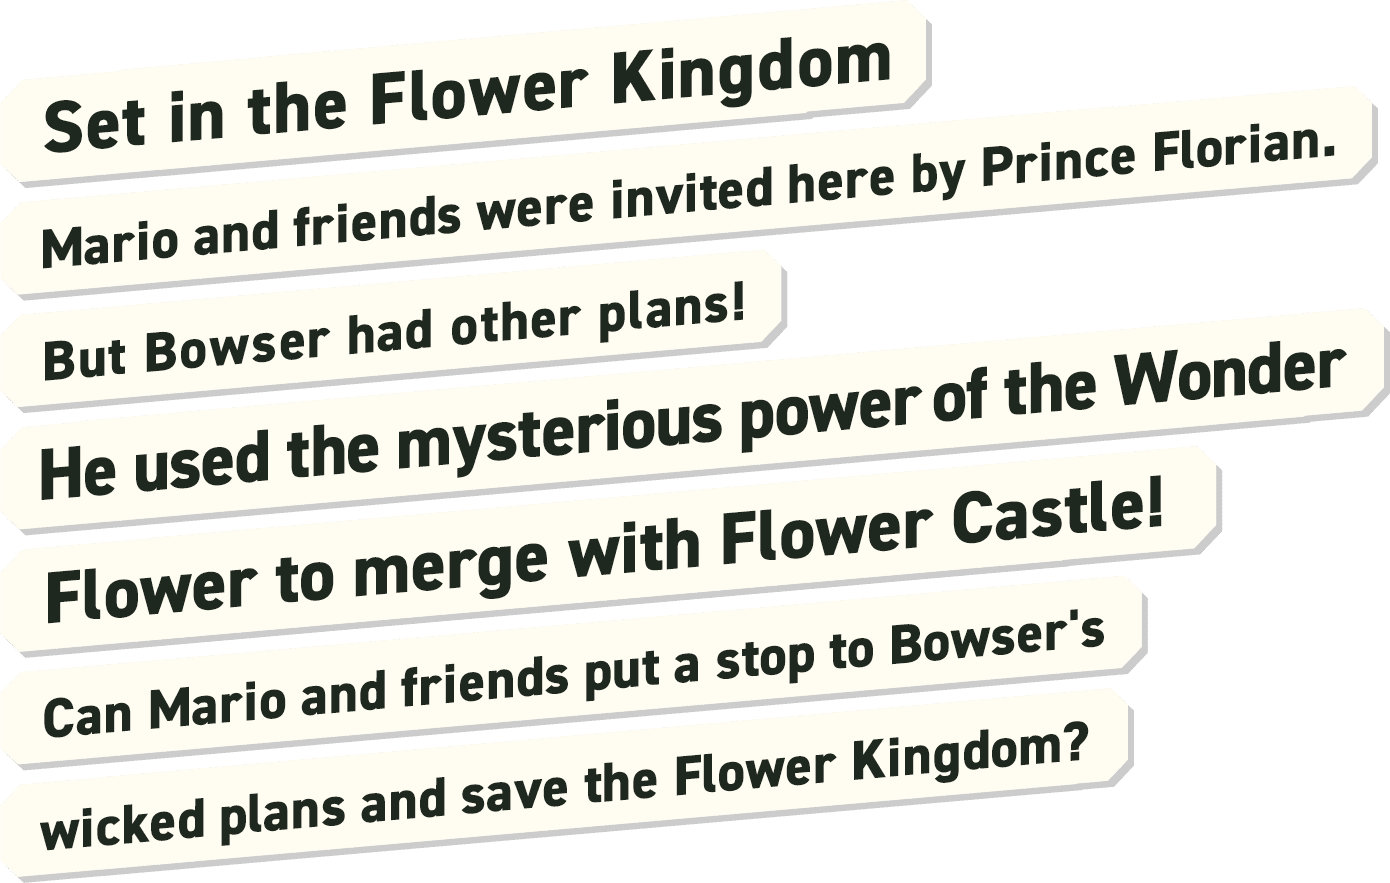 Set in the Flower Kingdom. Mario and friends were invited here by Prince Florian. But Bowser had other plans! He used the mysterious power of the  Wonder Flower to merge with Flower Castle! Can Mario and friends put a stop to Bowser's wicked plans and save the Flower Kingdom?